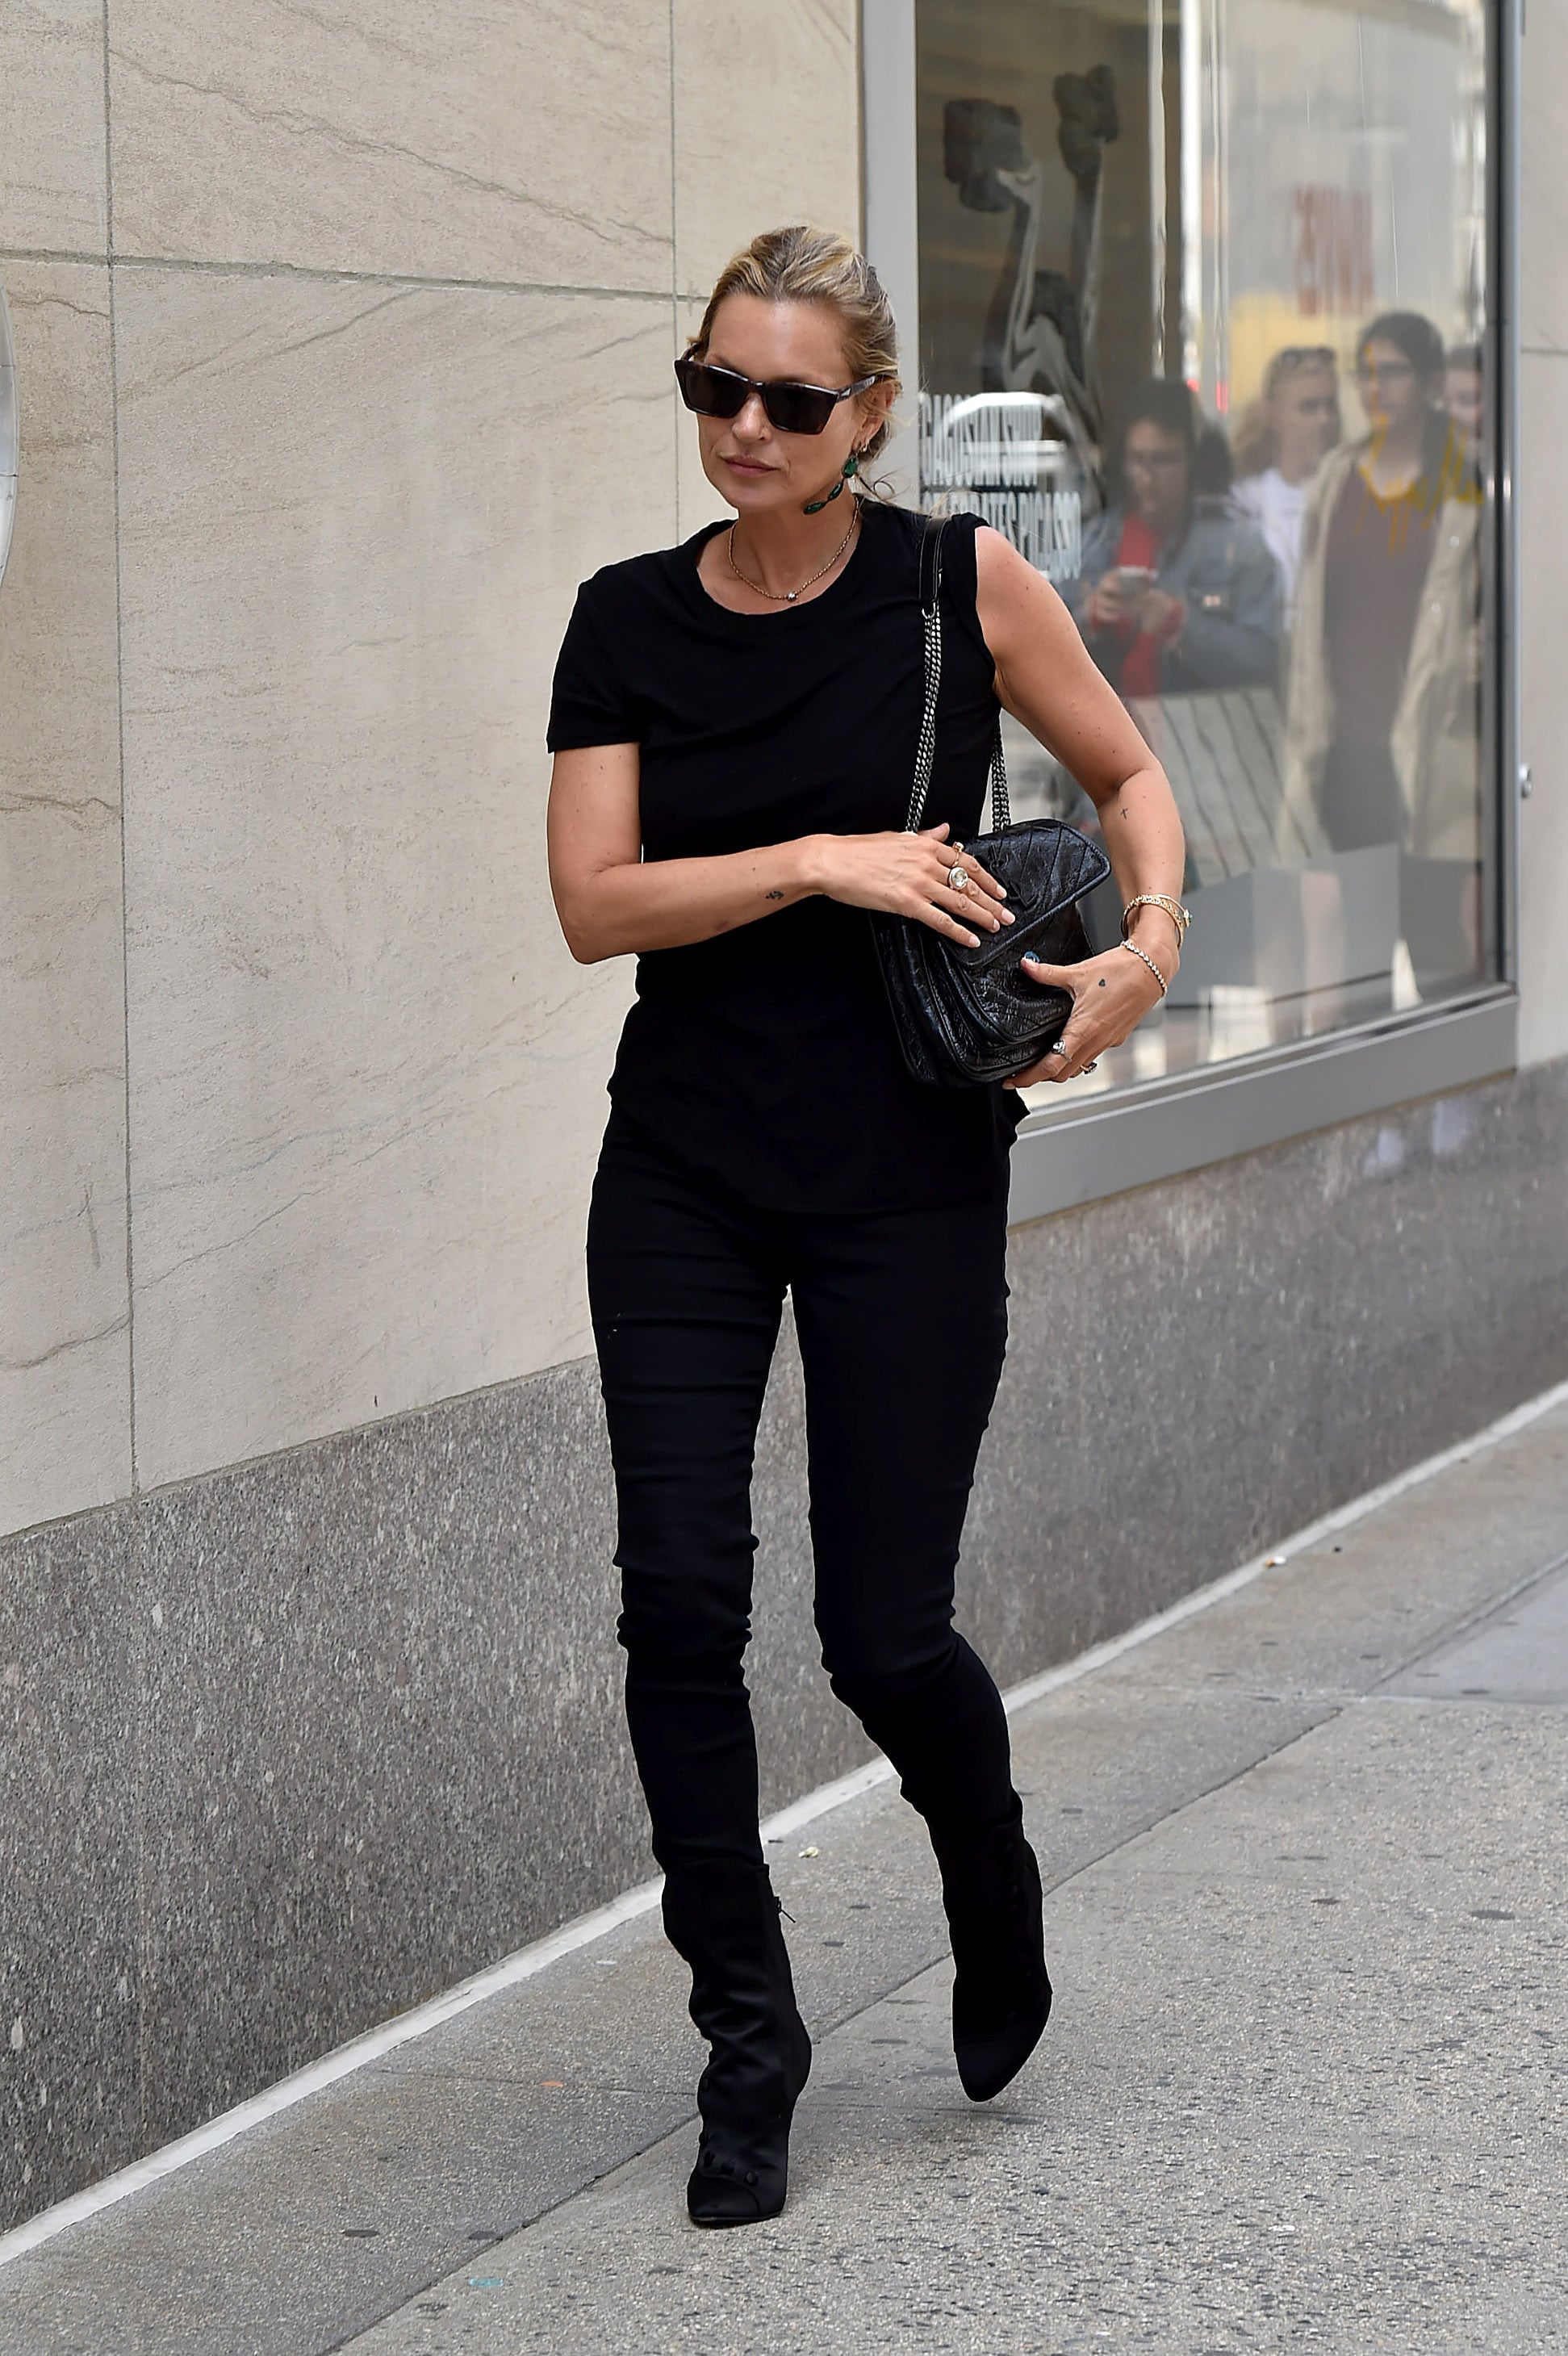 Moss is the definition of minimal and chic while strolling on Madison Avenue in New York City.